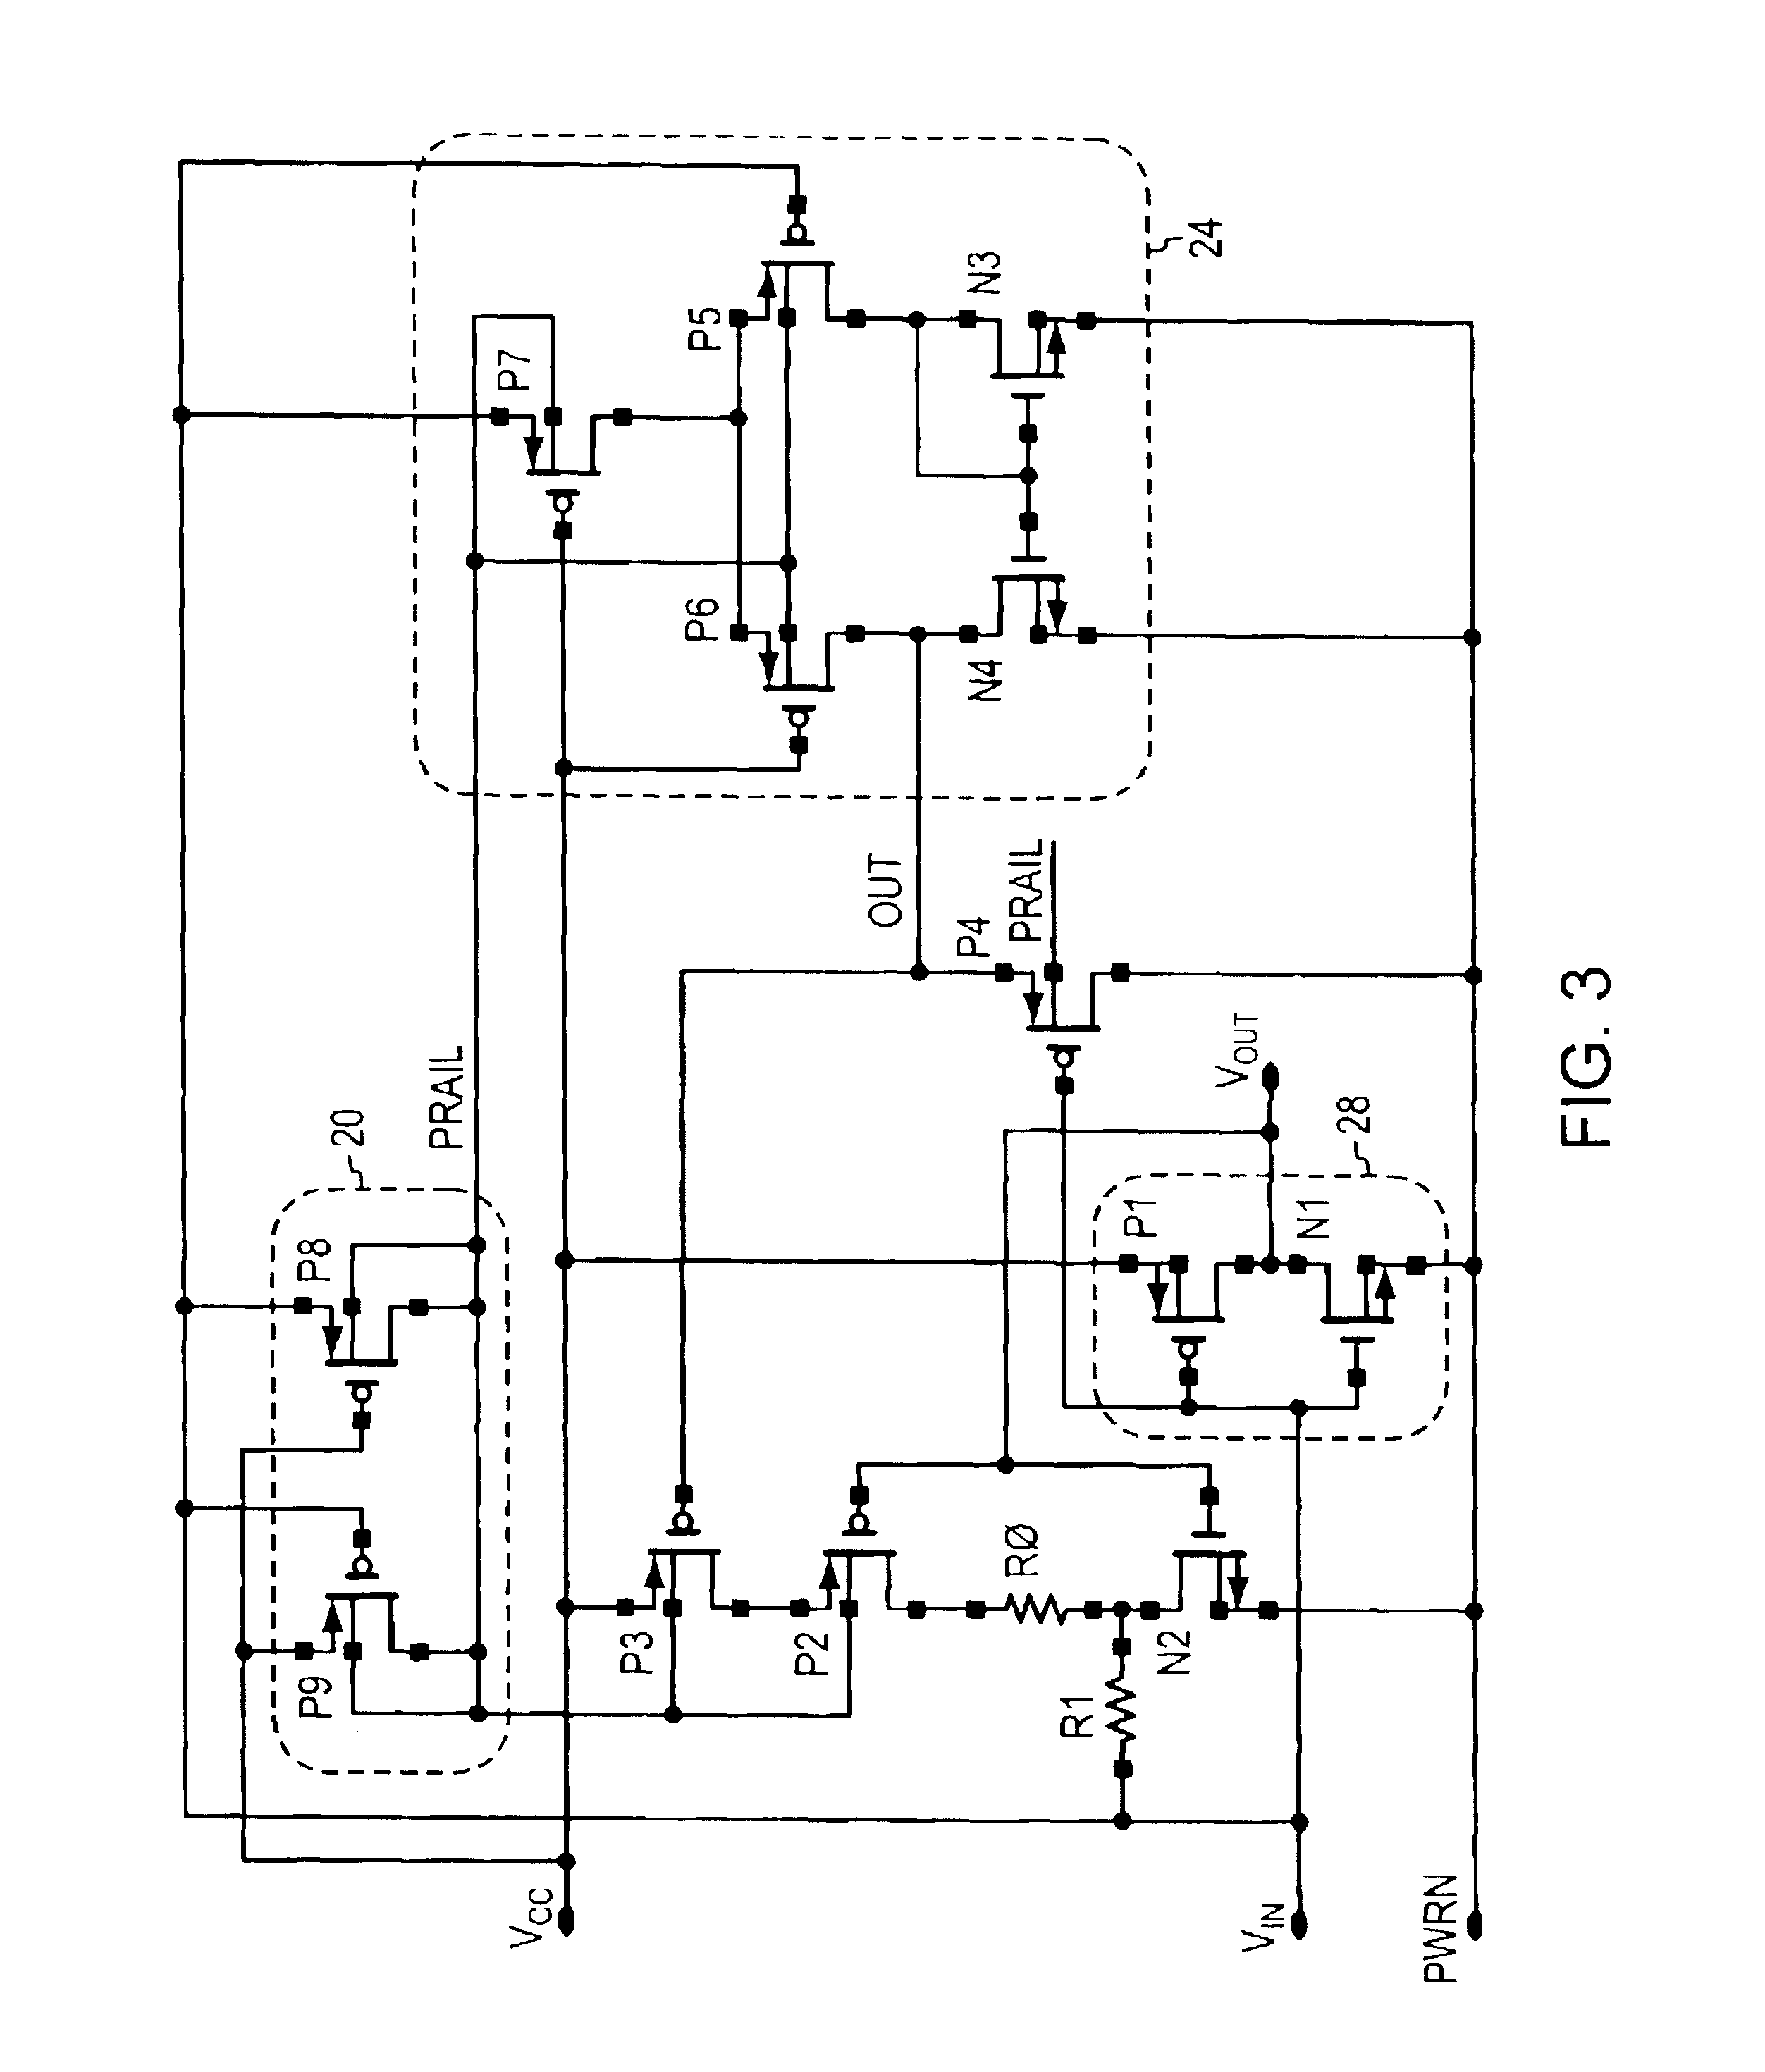 Bus hold circuit with power-down and over-voltage tolerance